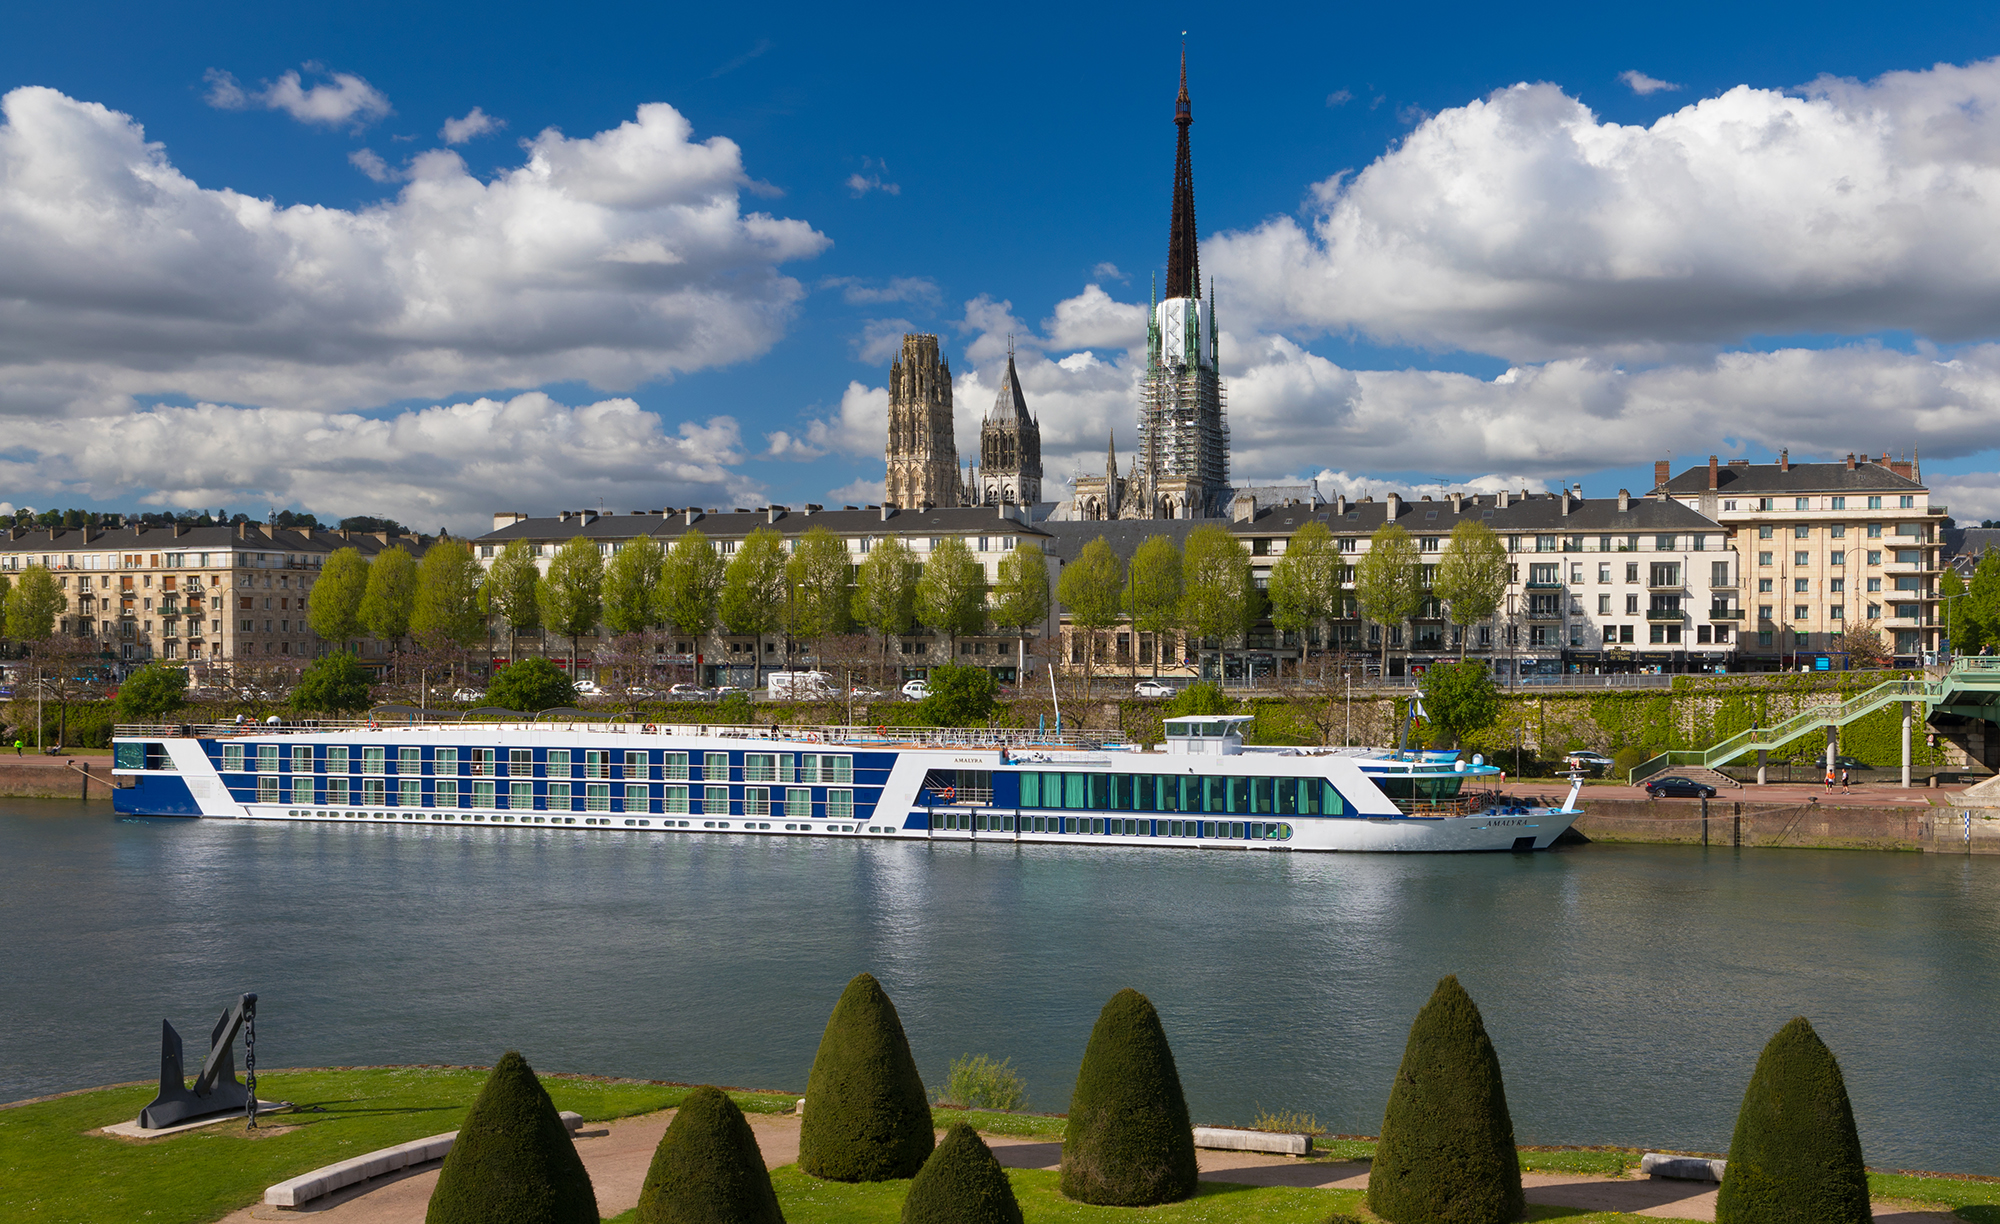 River Cruising allows you to visit more of a country then you could imagine